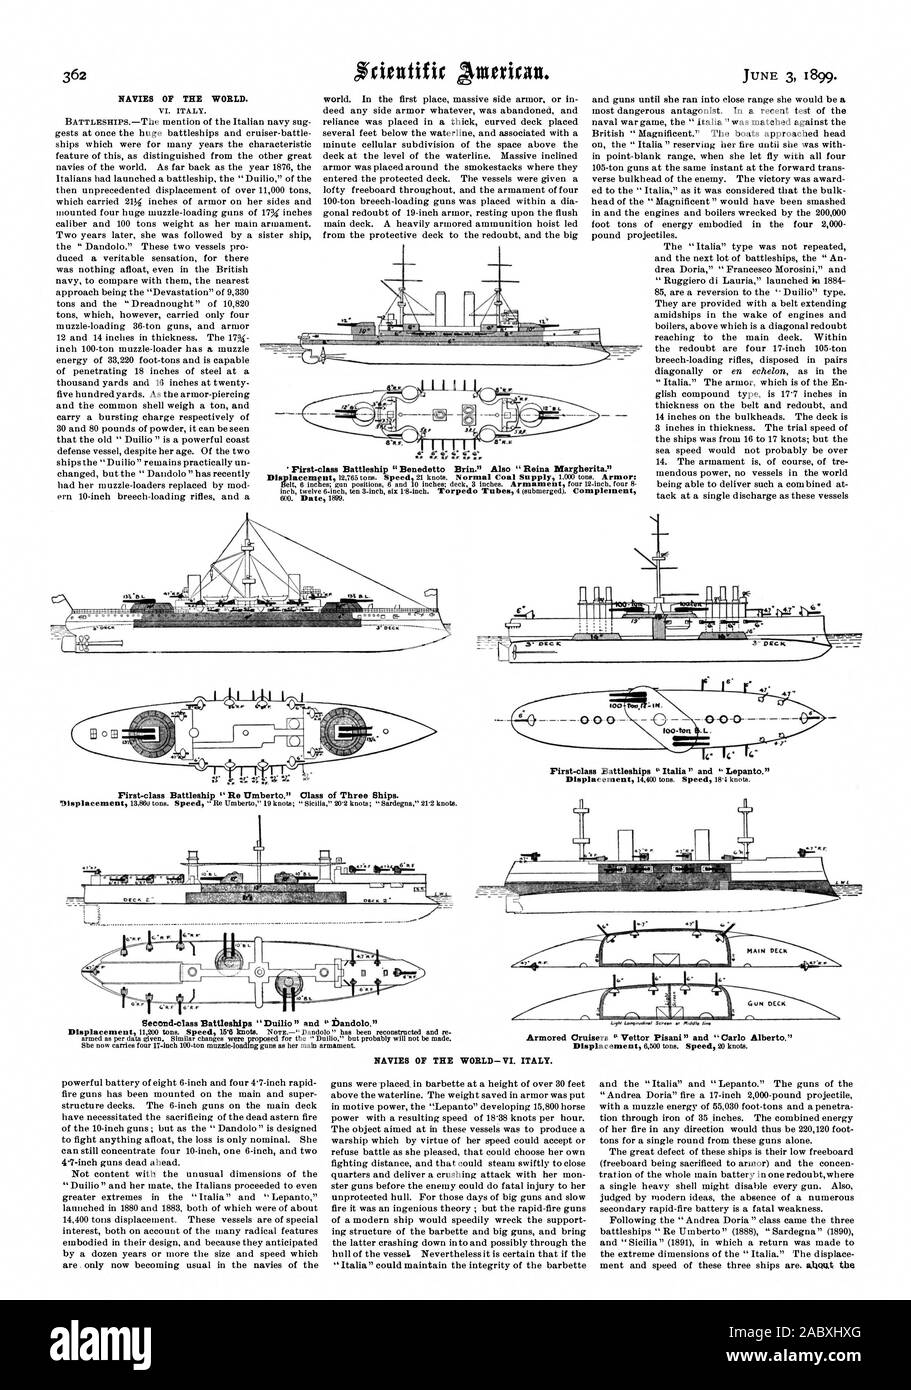 NAVIES OF THE WORLD. First-class Battleship 'Benedetto Brim.' Also ' Reina Margherita.' First-class Battleship 'Re Umberto.' Class of Three Ships. Second-class Battleships ' Duilio ' and ' Dandolo.' Armored Cruisers ' Vettor Pisani' and Carlo Alberto.' First-class Battleships ' Italia ' and 'Lepanto.' NAVIES OF THE WORLD—VI. ITALY., scientific american, 1899-06-03 Stock Photo